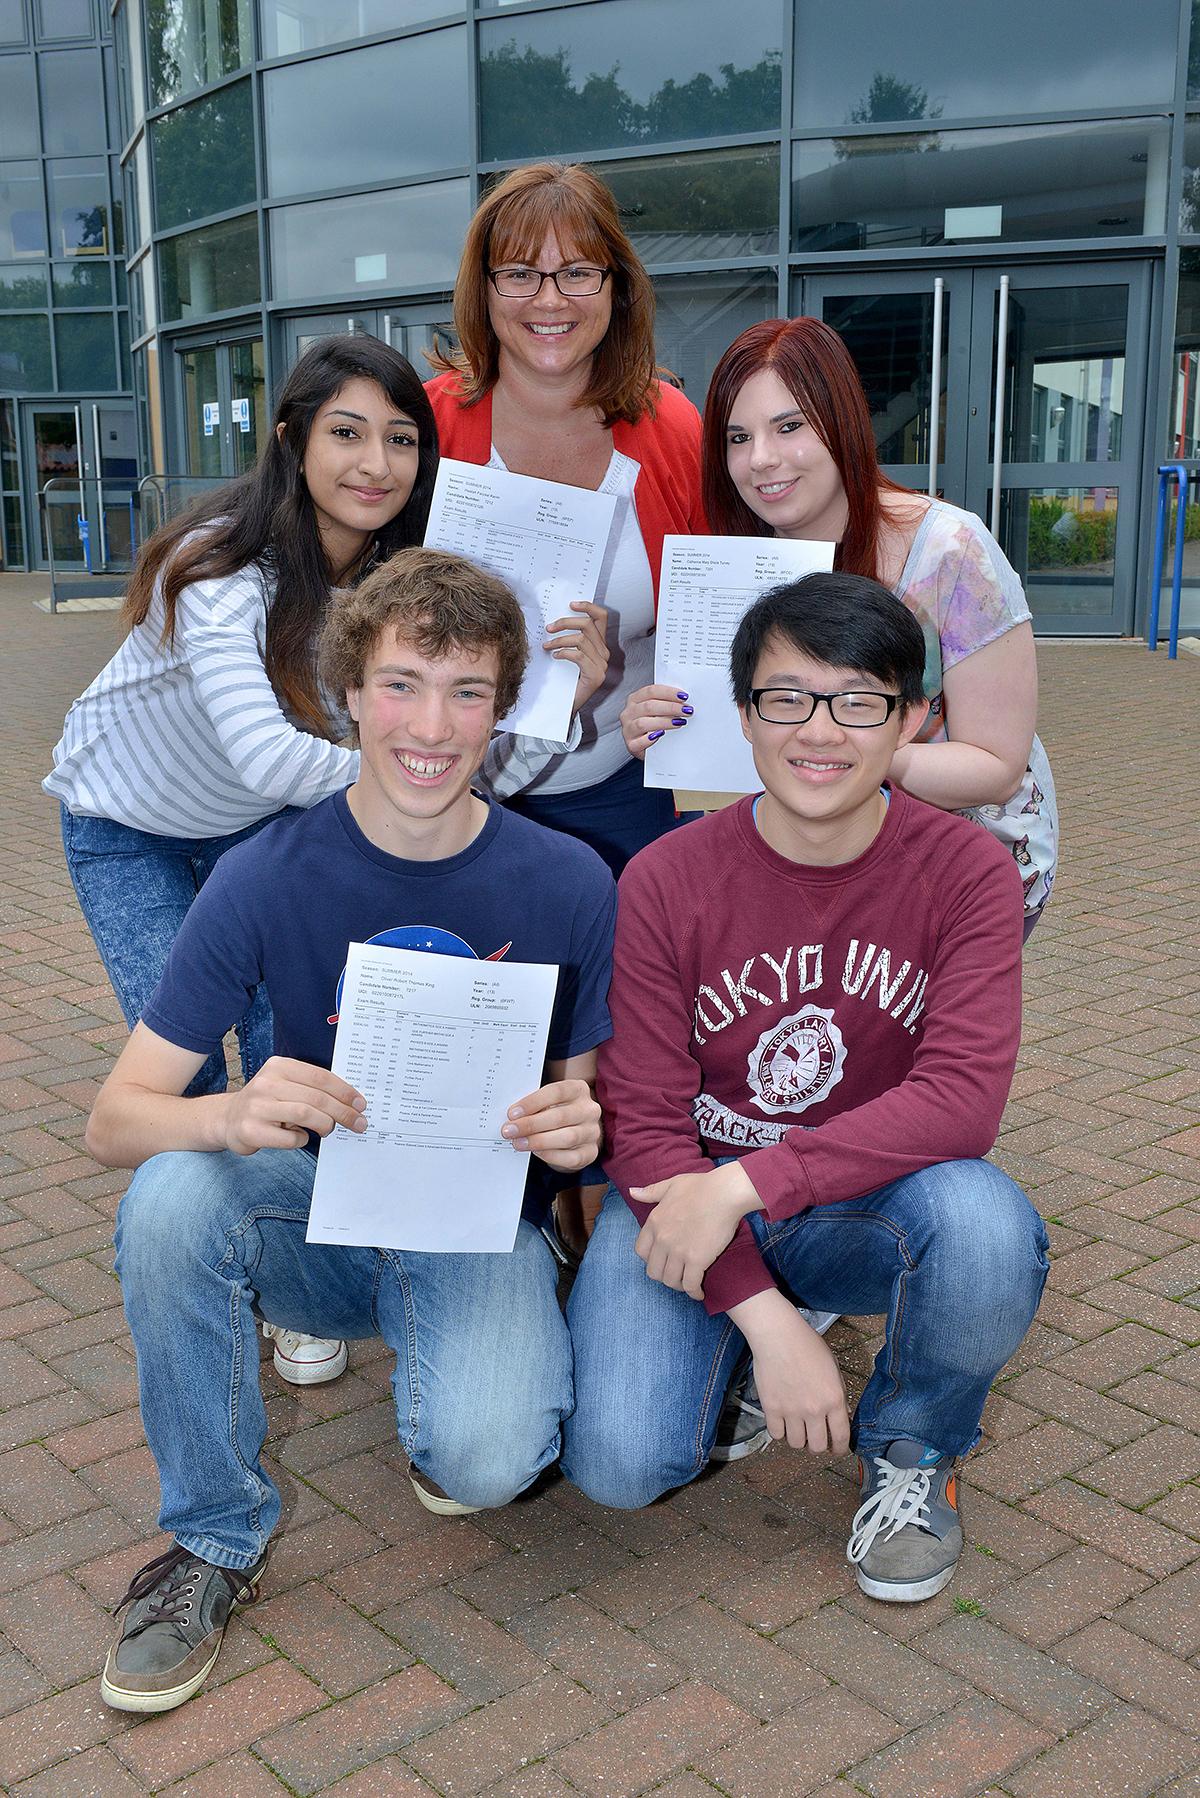 Pictures from around the counties school of student collecting their A-Level results